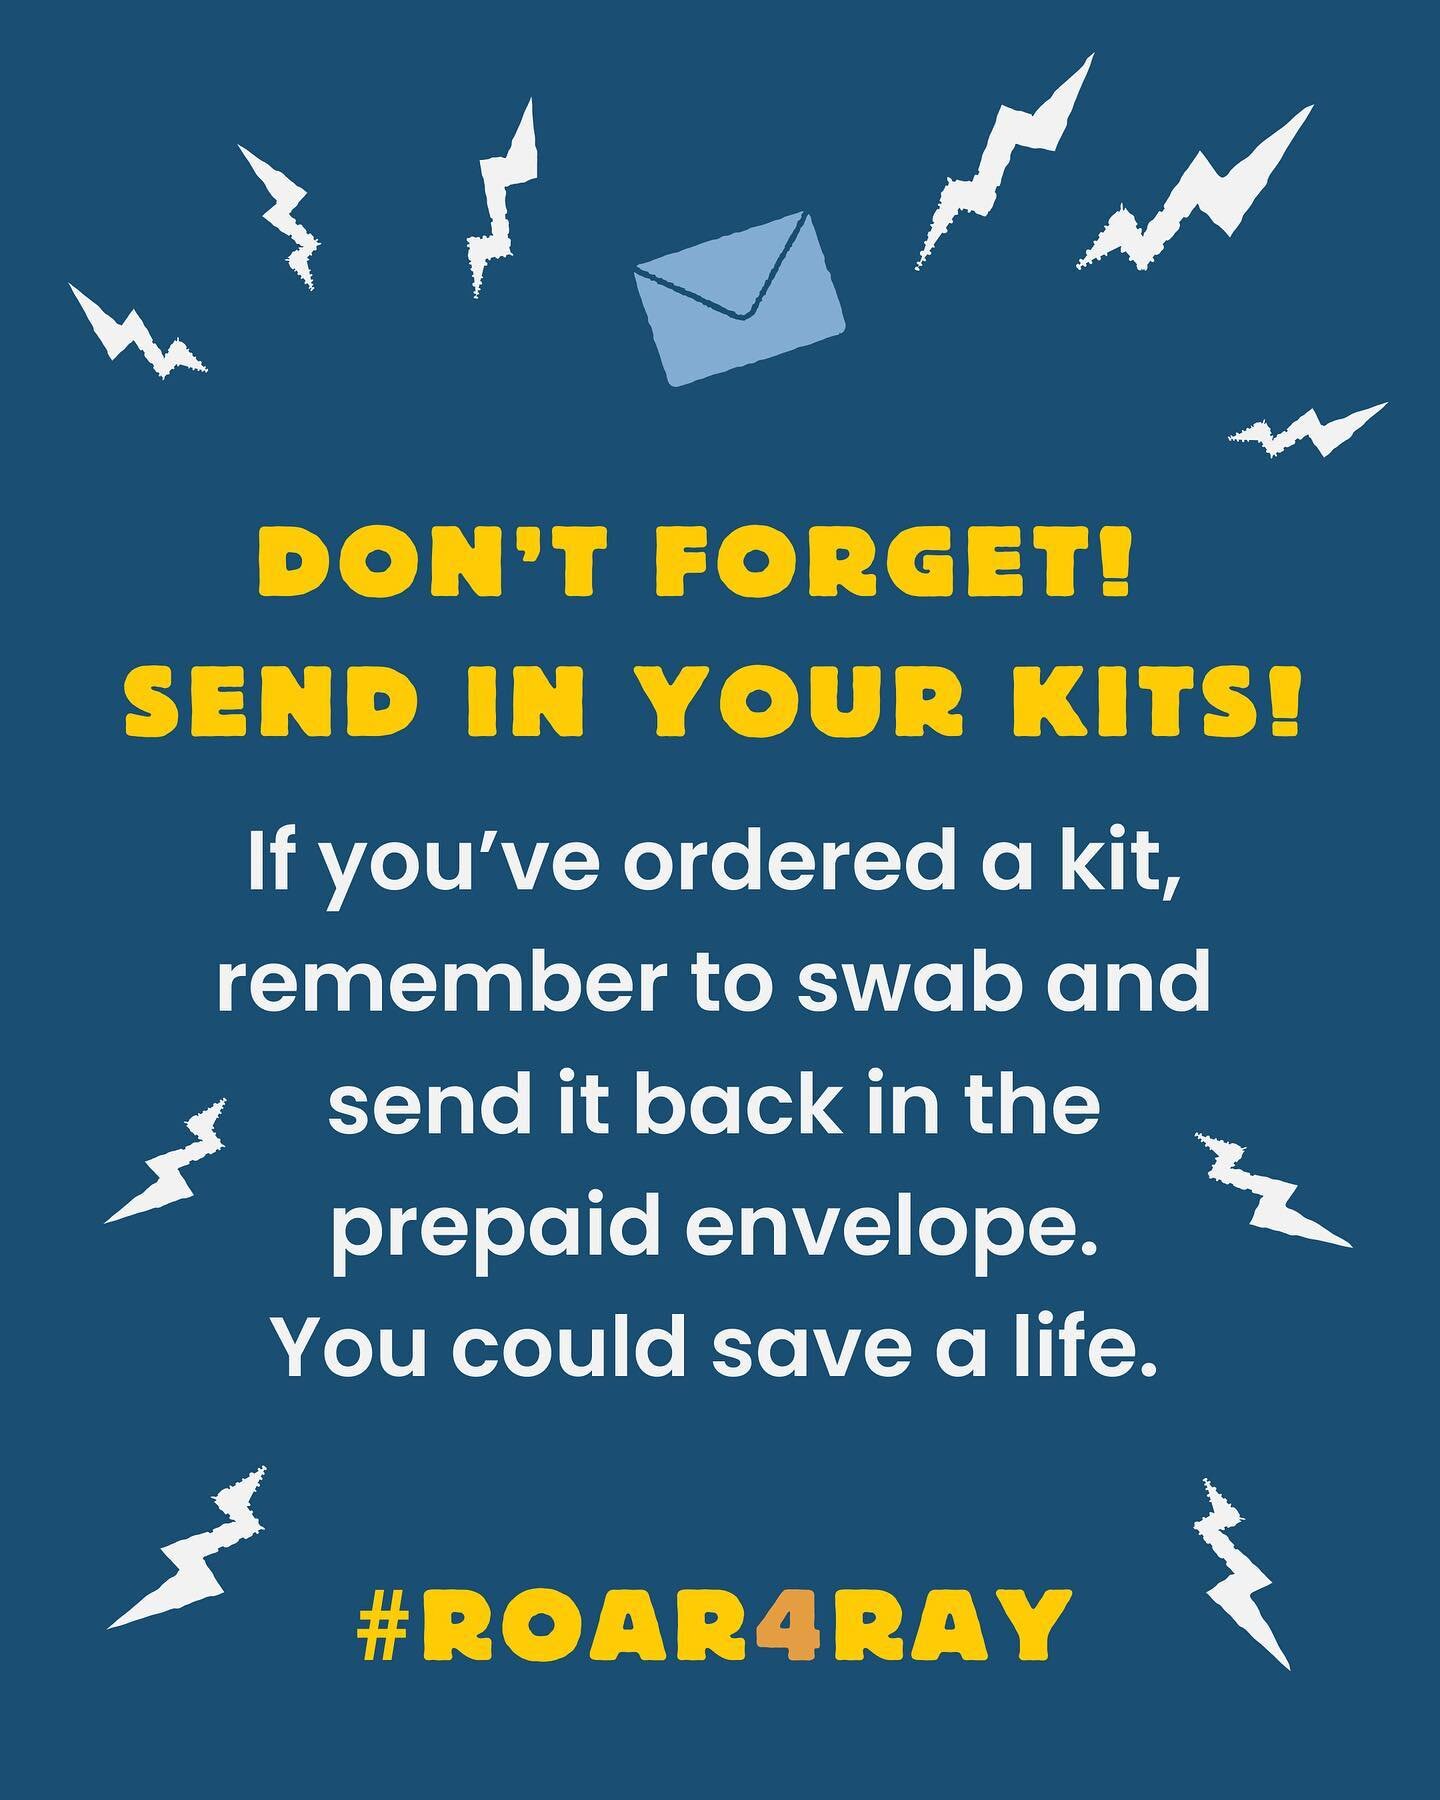 📣🦁 Don&rsquo;t forget! Thank you all so much for ordering your at-home swab kits. Make sure that once you&rsquo;ve received it, you send it back. In just 10 seconds, you could save a life!

1️⃣ If you haven&rsquo;t already, head to roar4ray.org to 